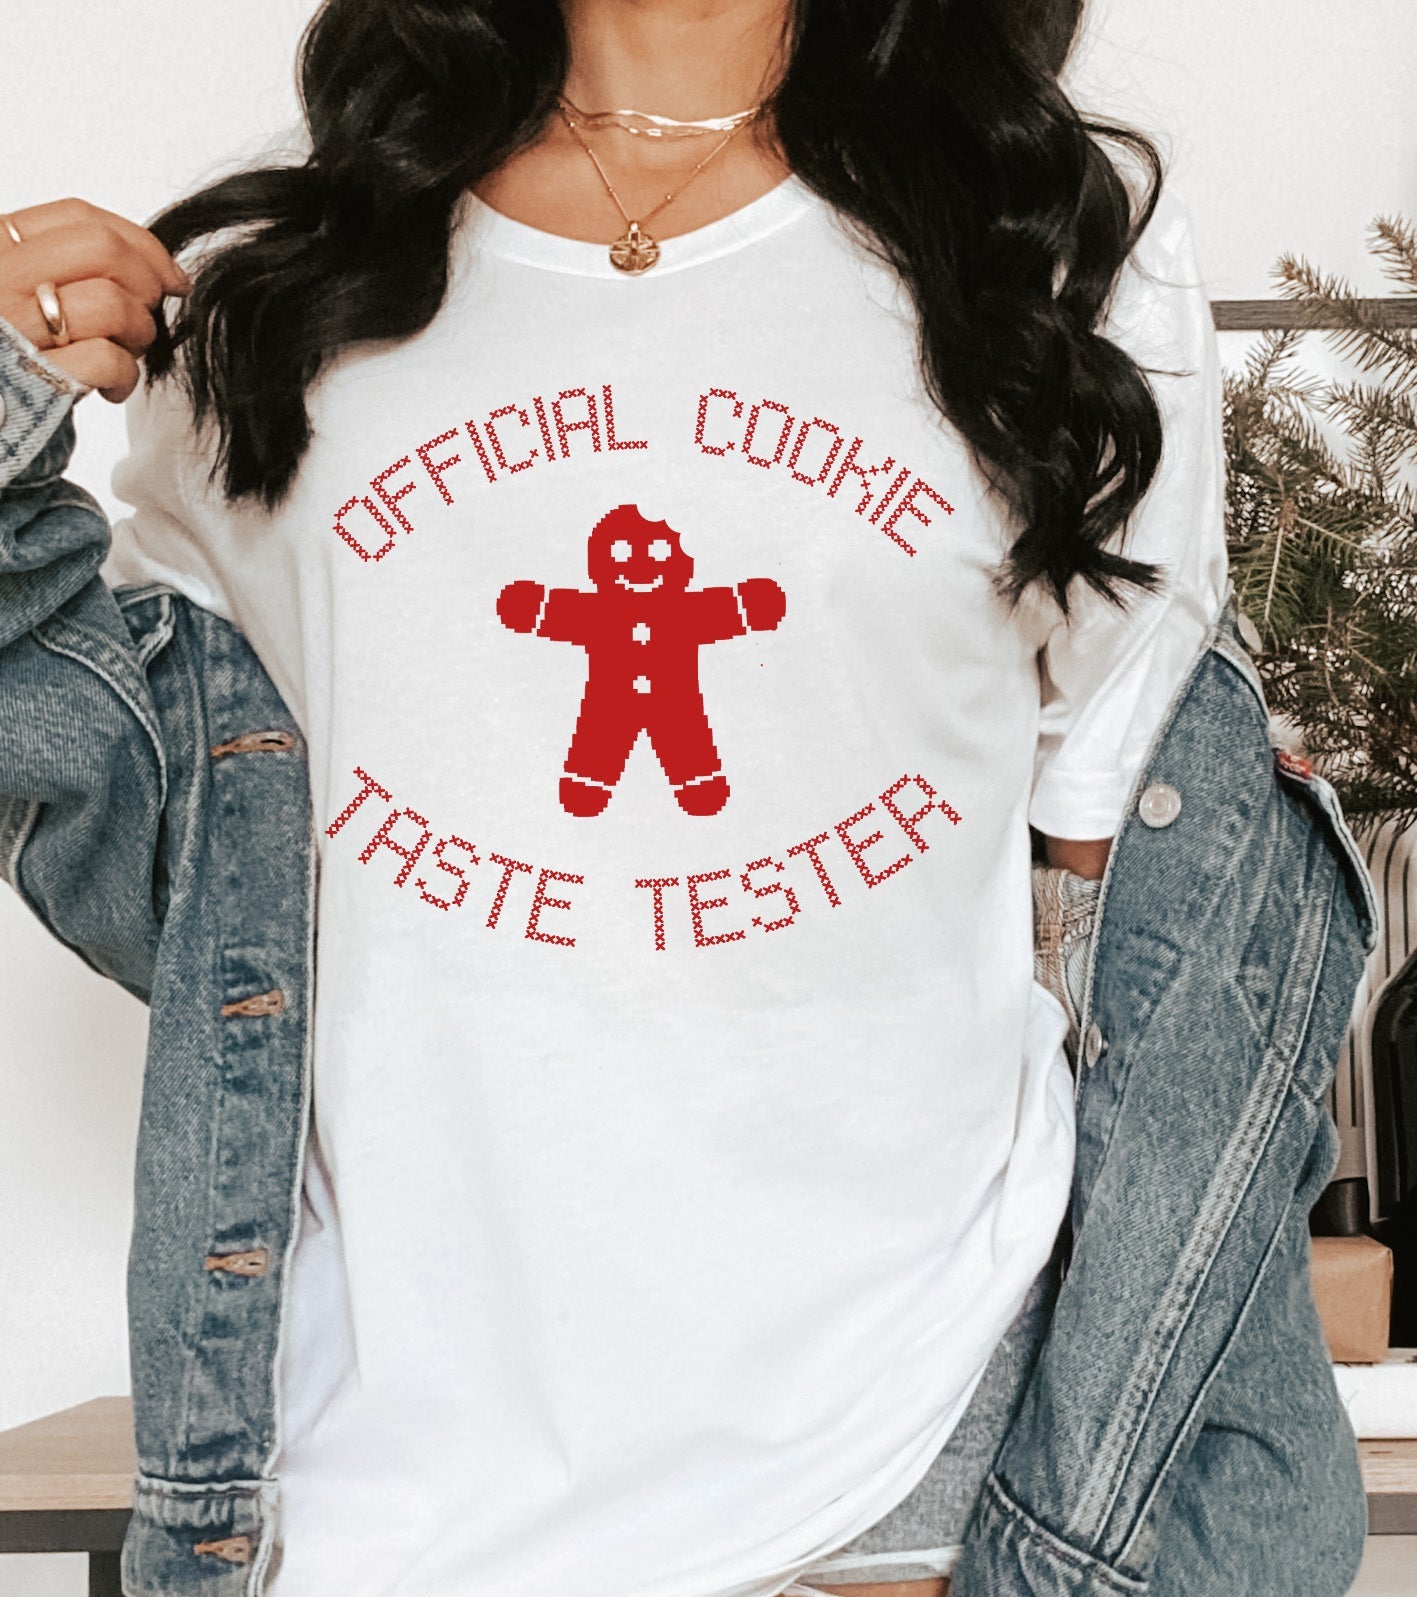 white shirt with a gingerbread man saying official cookie taste tester - HighCiti